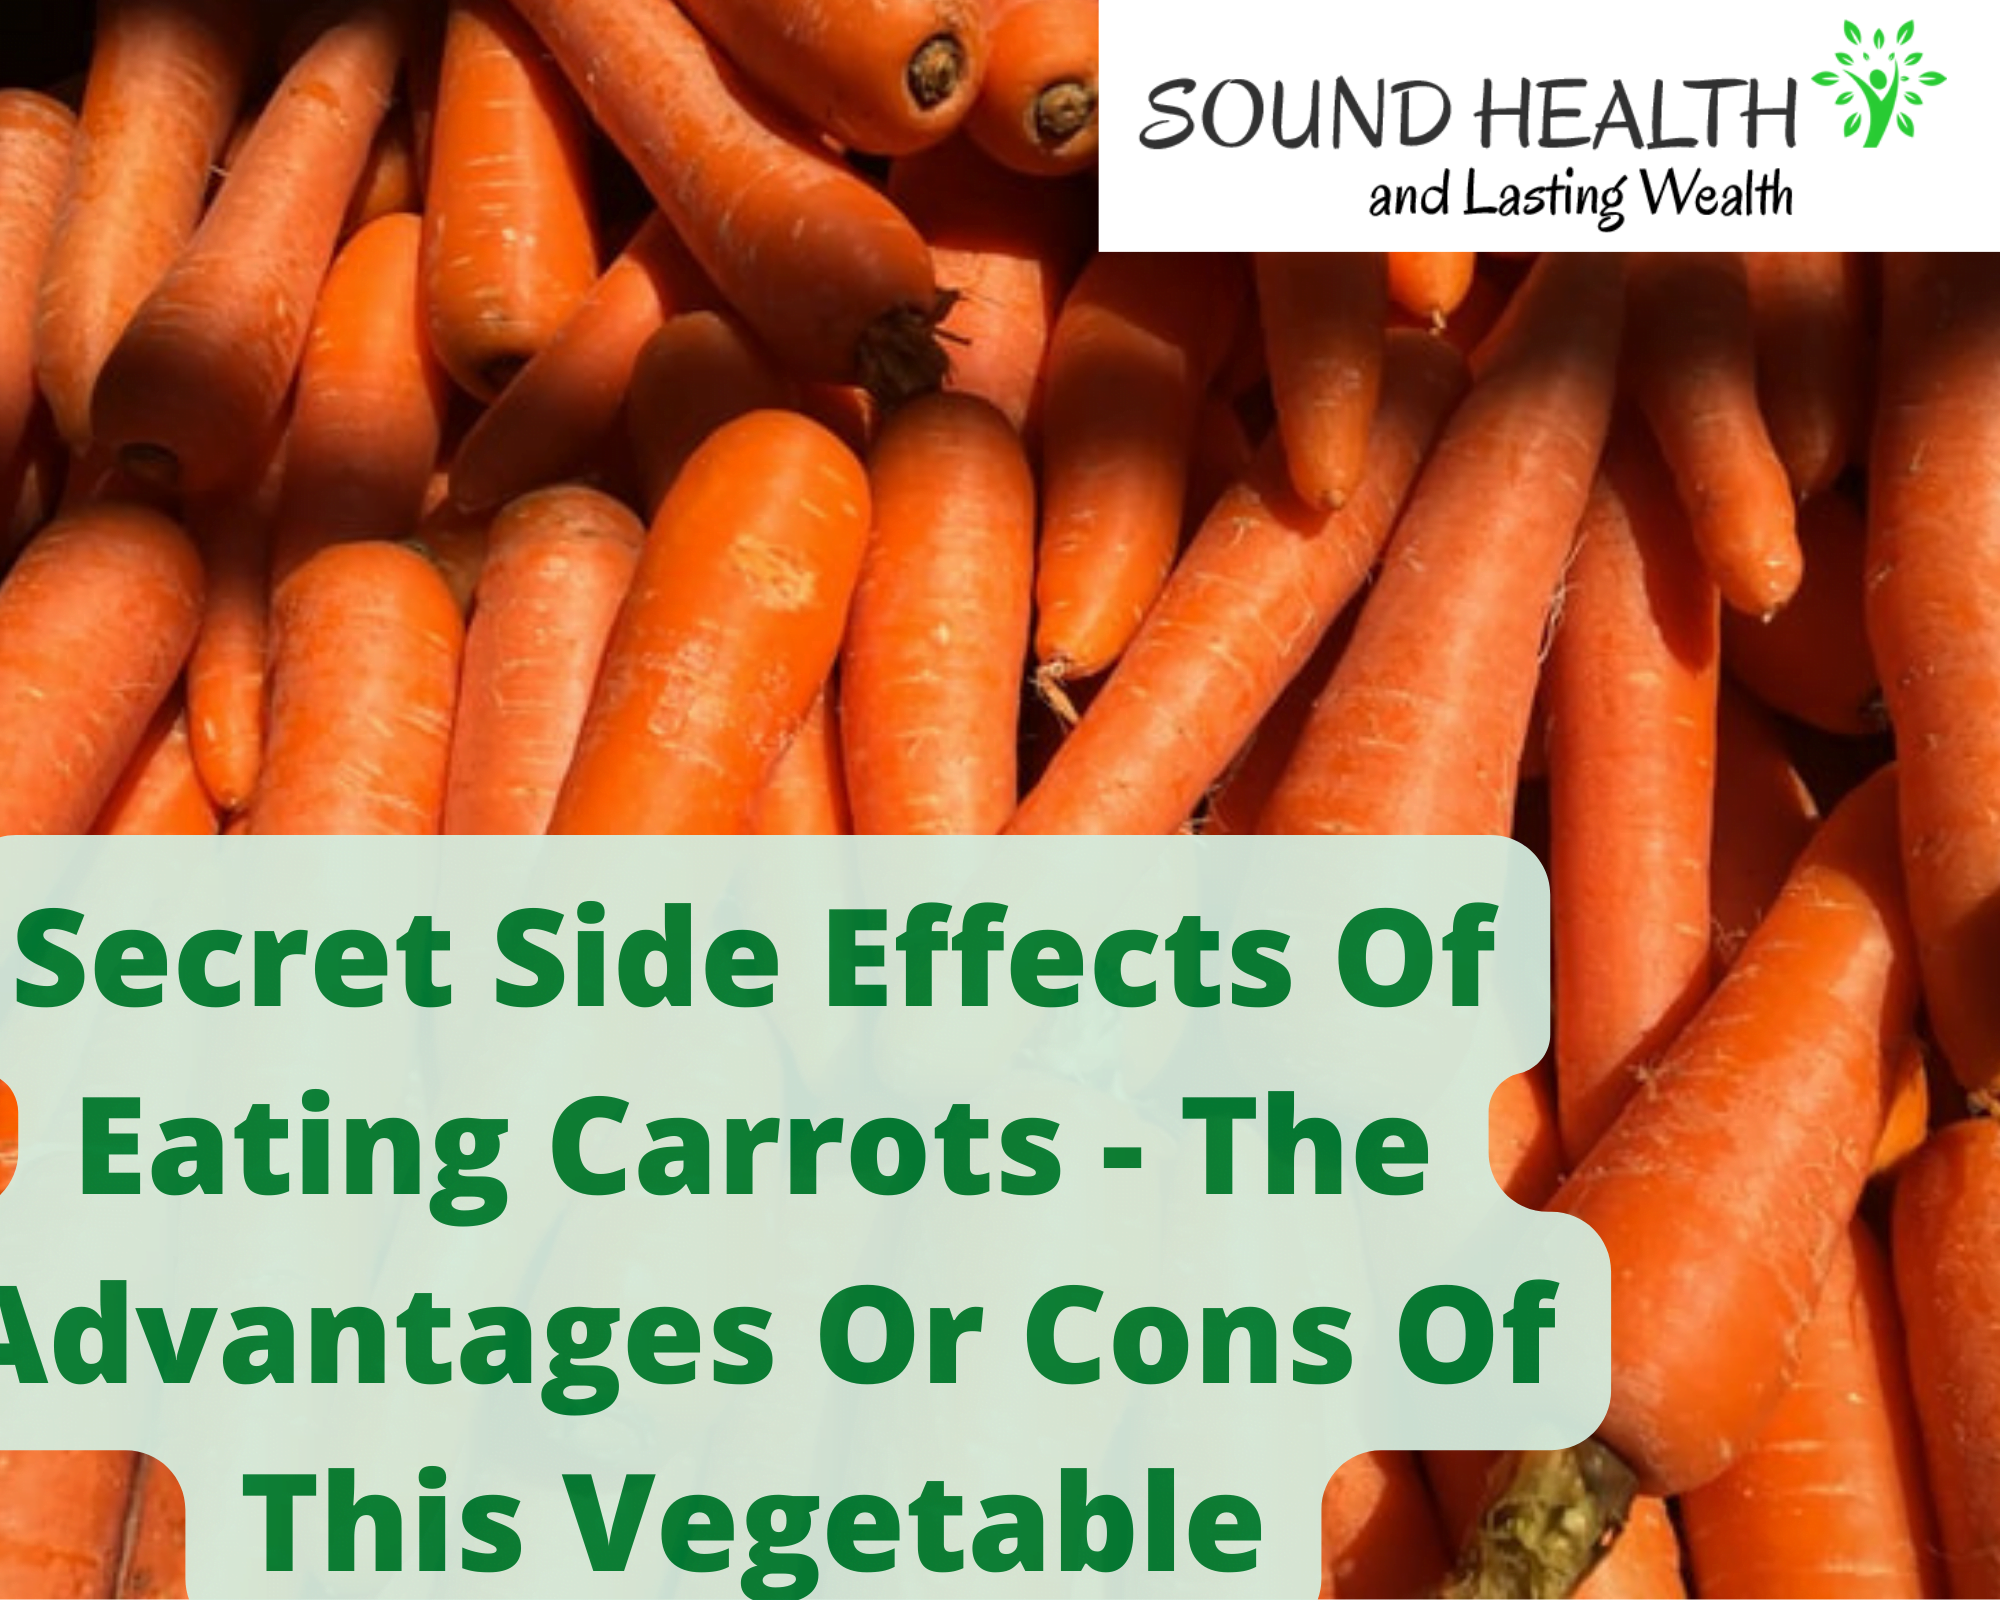 Secret Side Effects Of Eating Carrots - The Advantages Or Cons Of This Vegetable